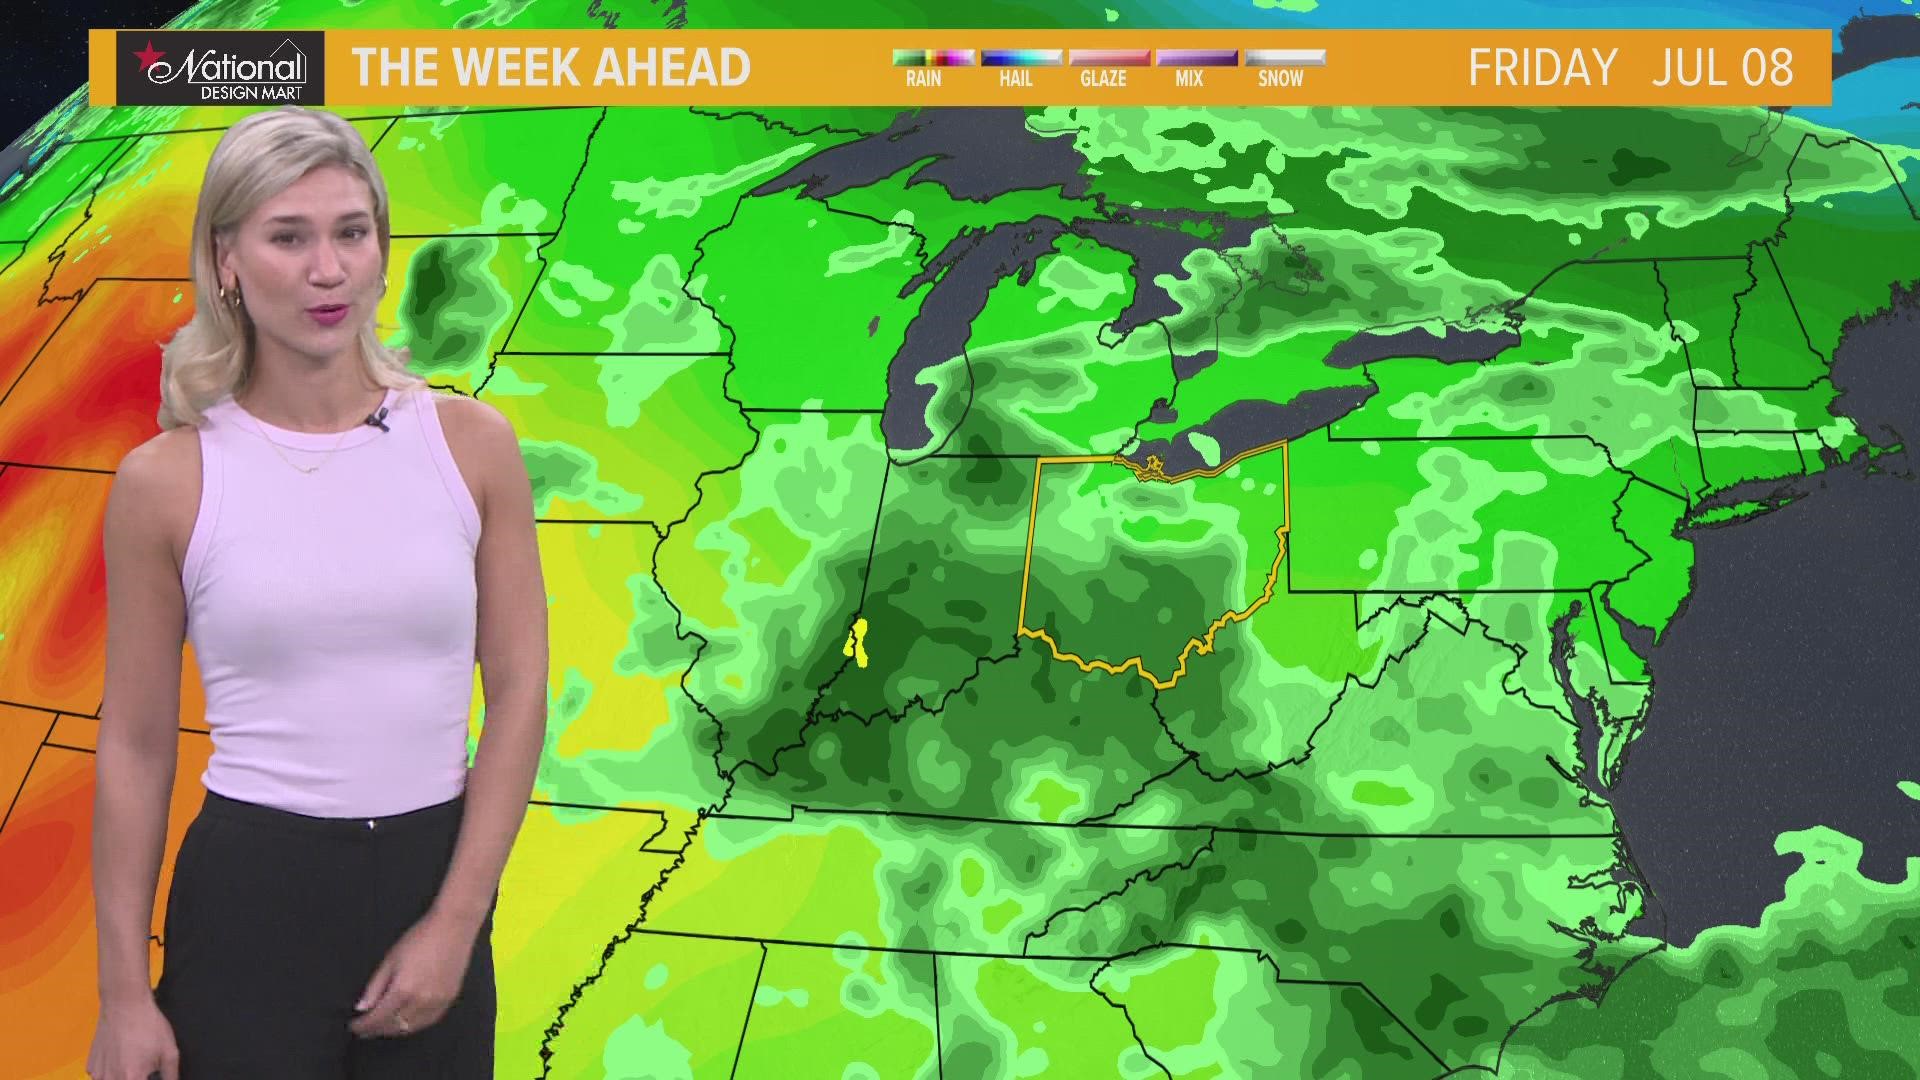 Payton says to expect a warm and seasonal start to your Fourth of July weekend.